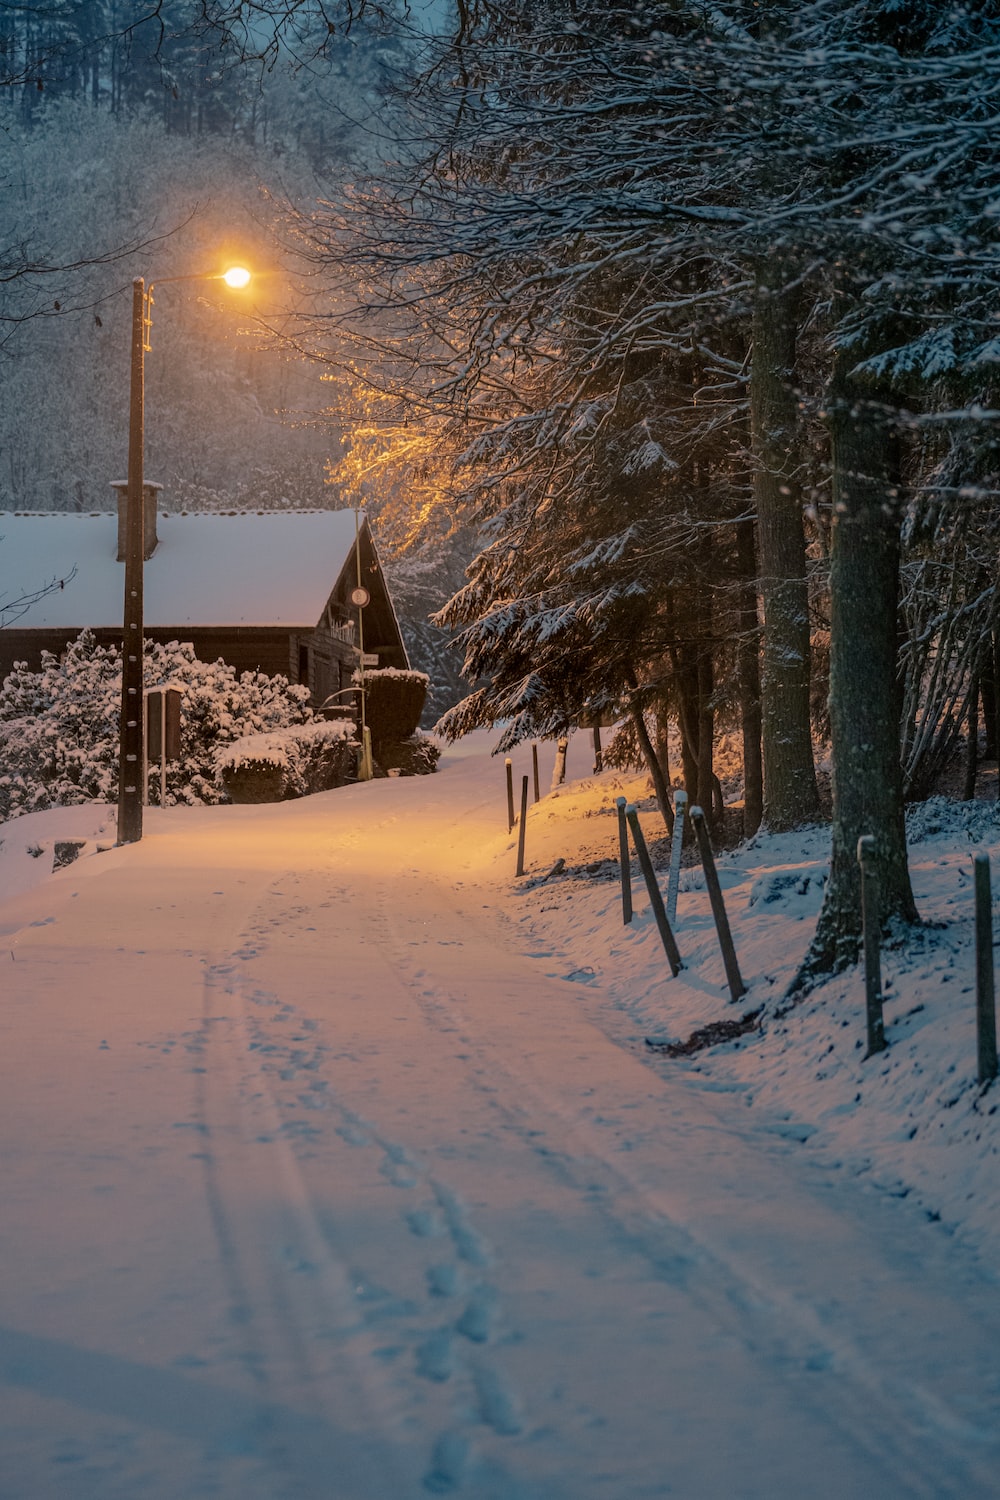 Best Snow Night Picture [HD]. Download Free Image